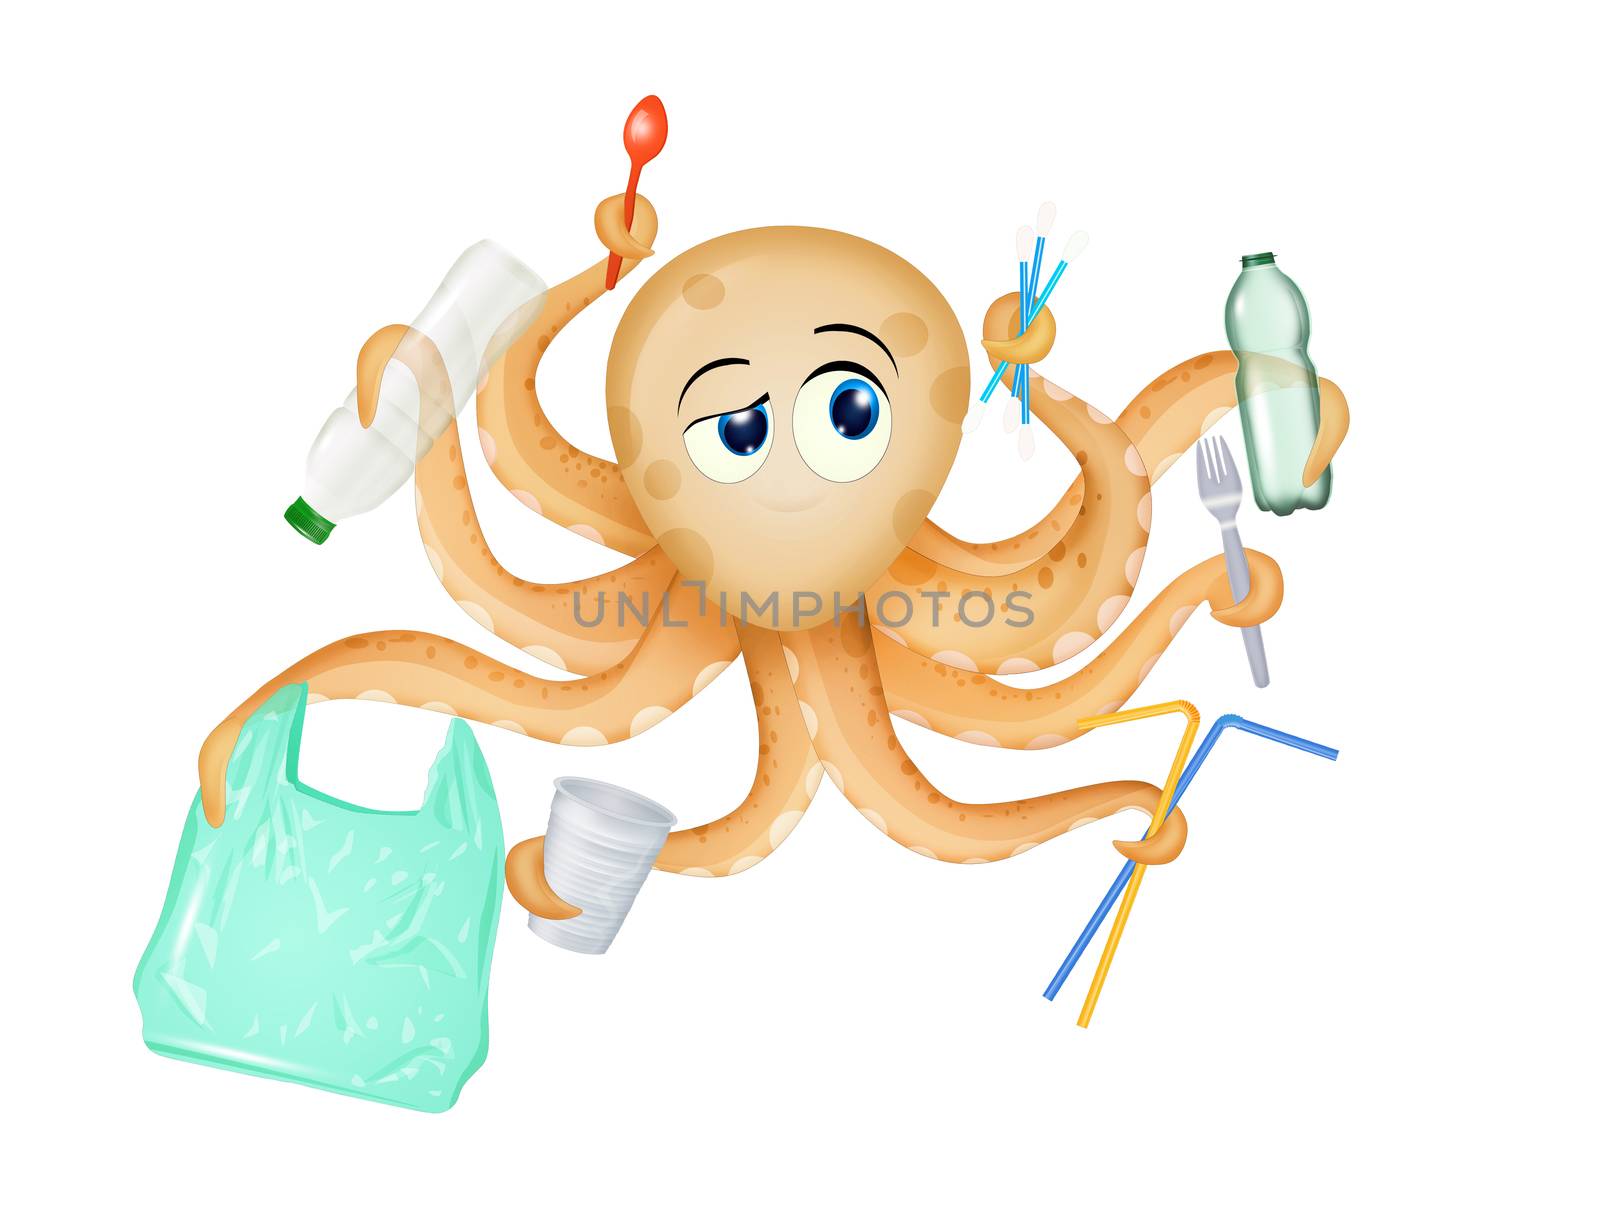 octopus with plastic objects by adrenalina